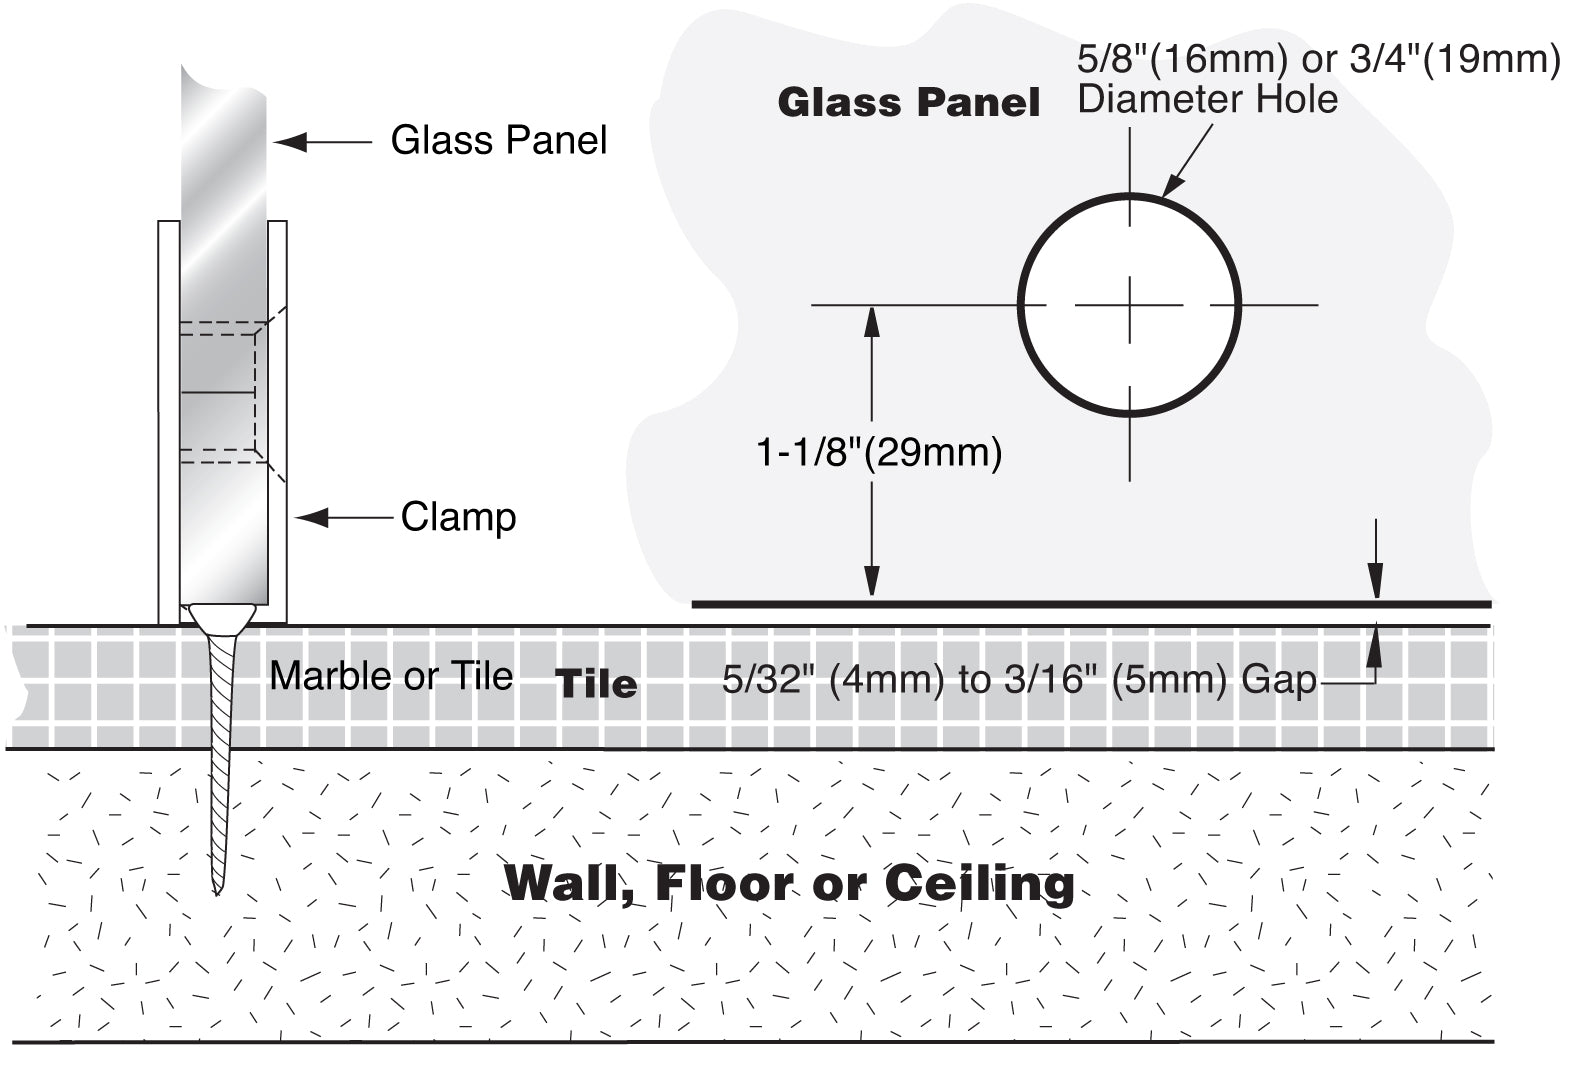 Beveled Hole-in-Glass Style Wall Mount Heavy-Duty Glass Clamp